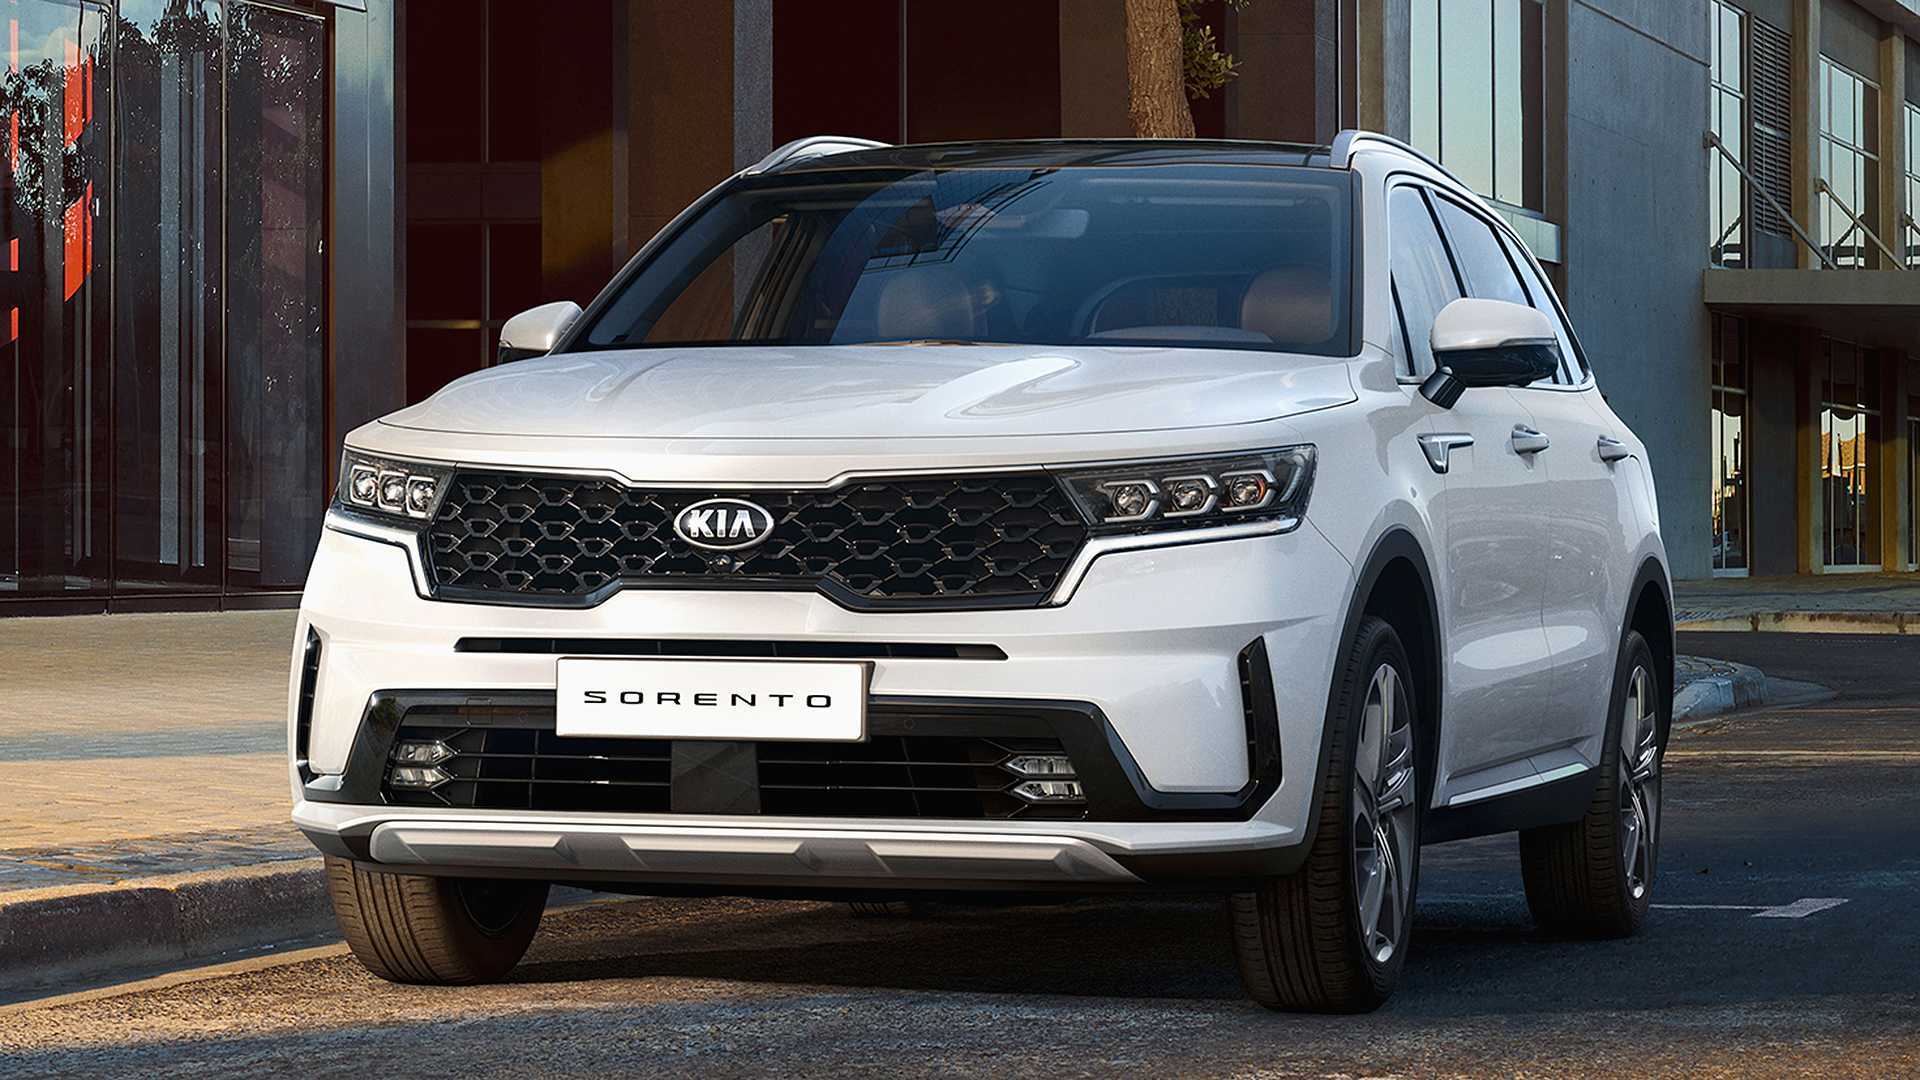 All-New Kia Sorento Gets Electrified For Very First Time